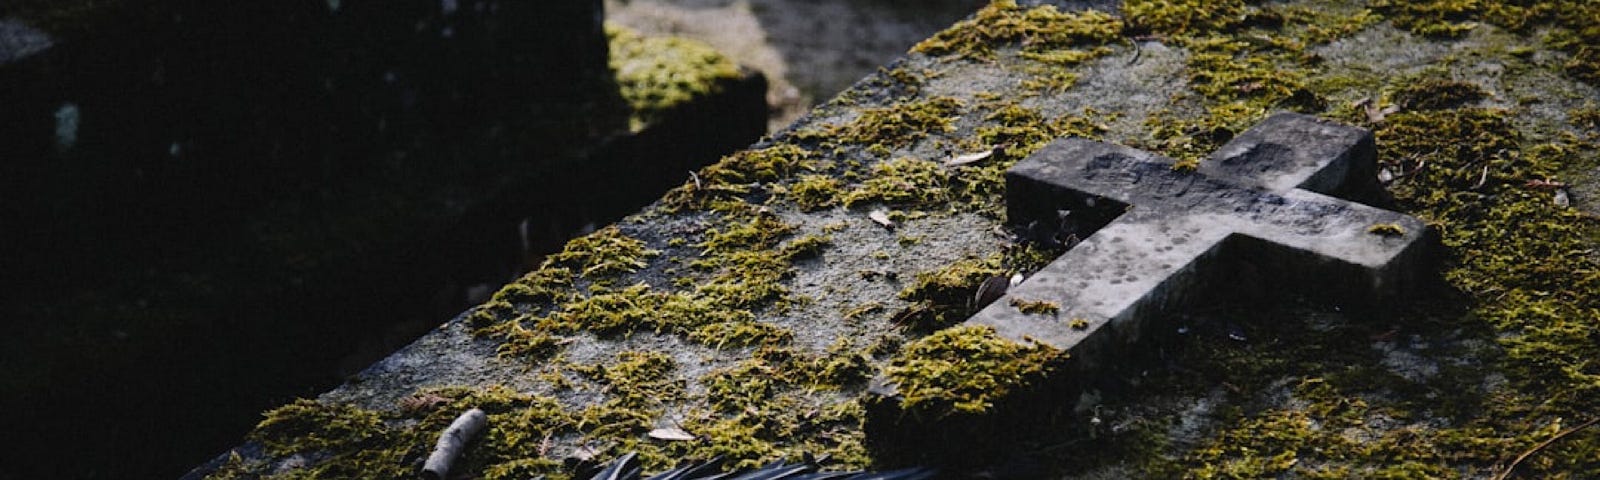 A weathered gravestone covered with patches of moss symbolizes the passage of time and the weight of history. Atop the stone is a Christian cross. Besides it, dark feathers evoke fragility and resilience. The scene invites reflection on mortality, memory, and enduring the impact left behind.